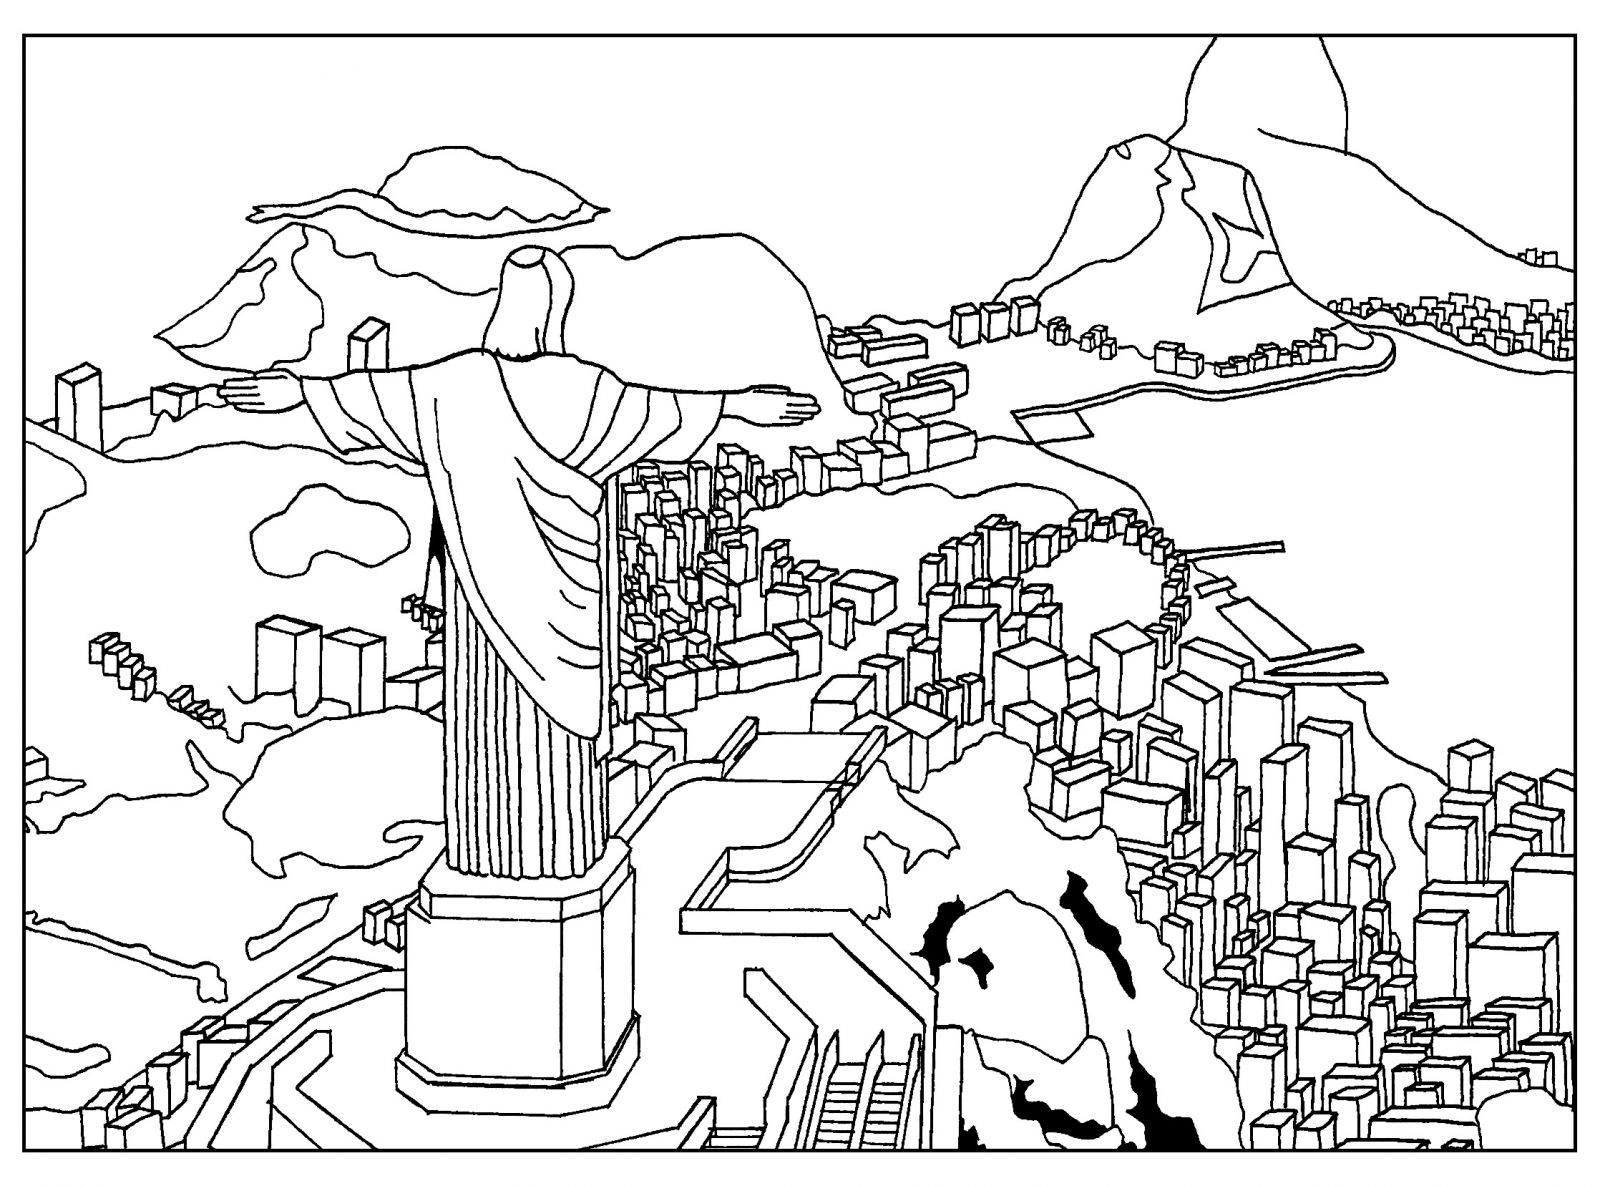 Download 7 Best Wonders Of The World Coloring Pages - Coloring ...